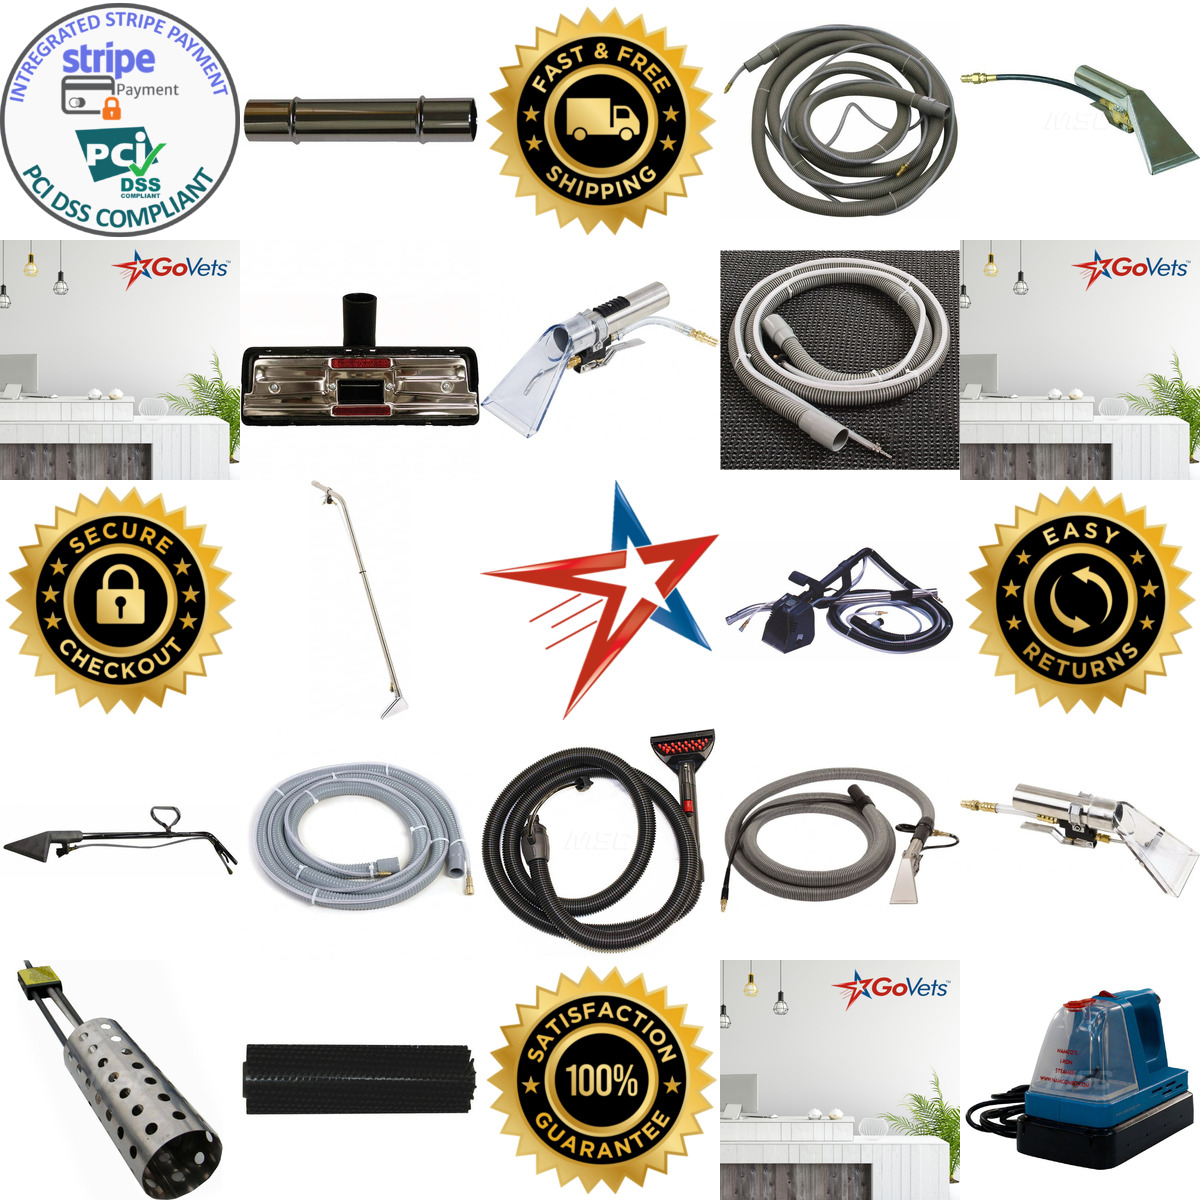 A selection of Carpet Cleaning Machine Hoses and Accessories products on GoVets